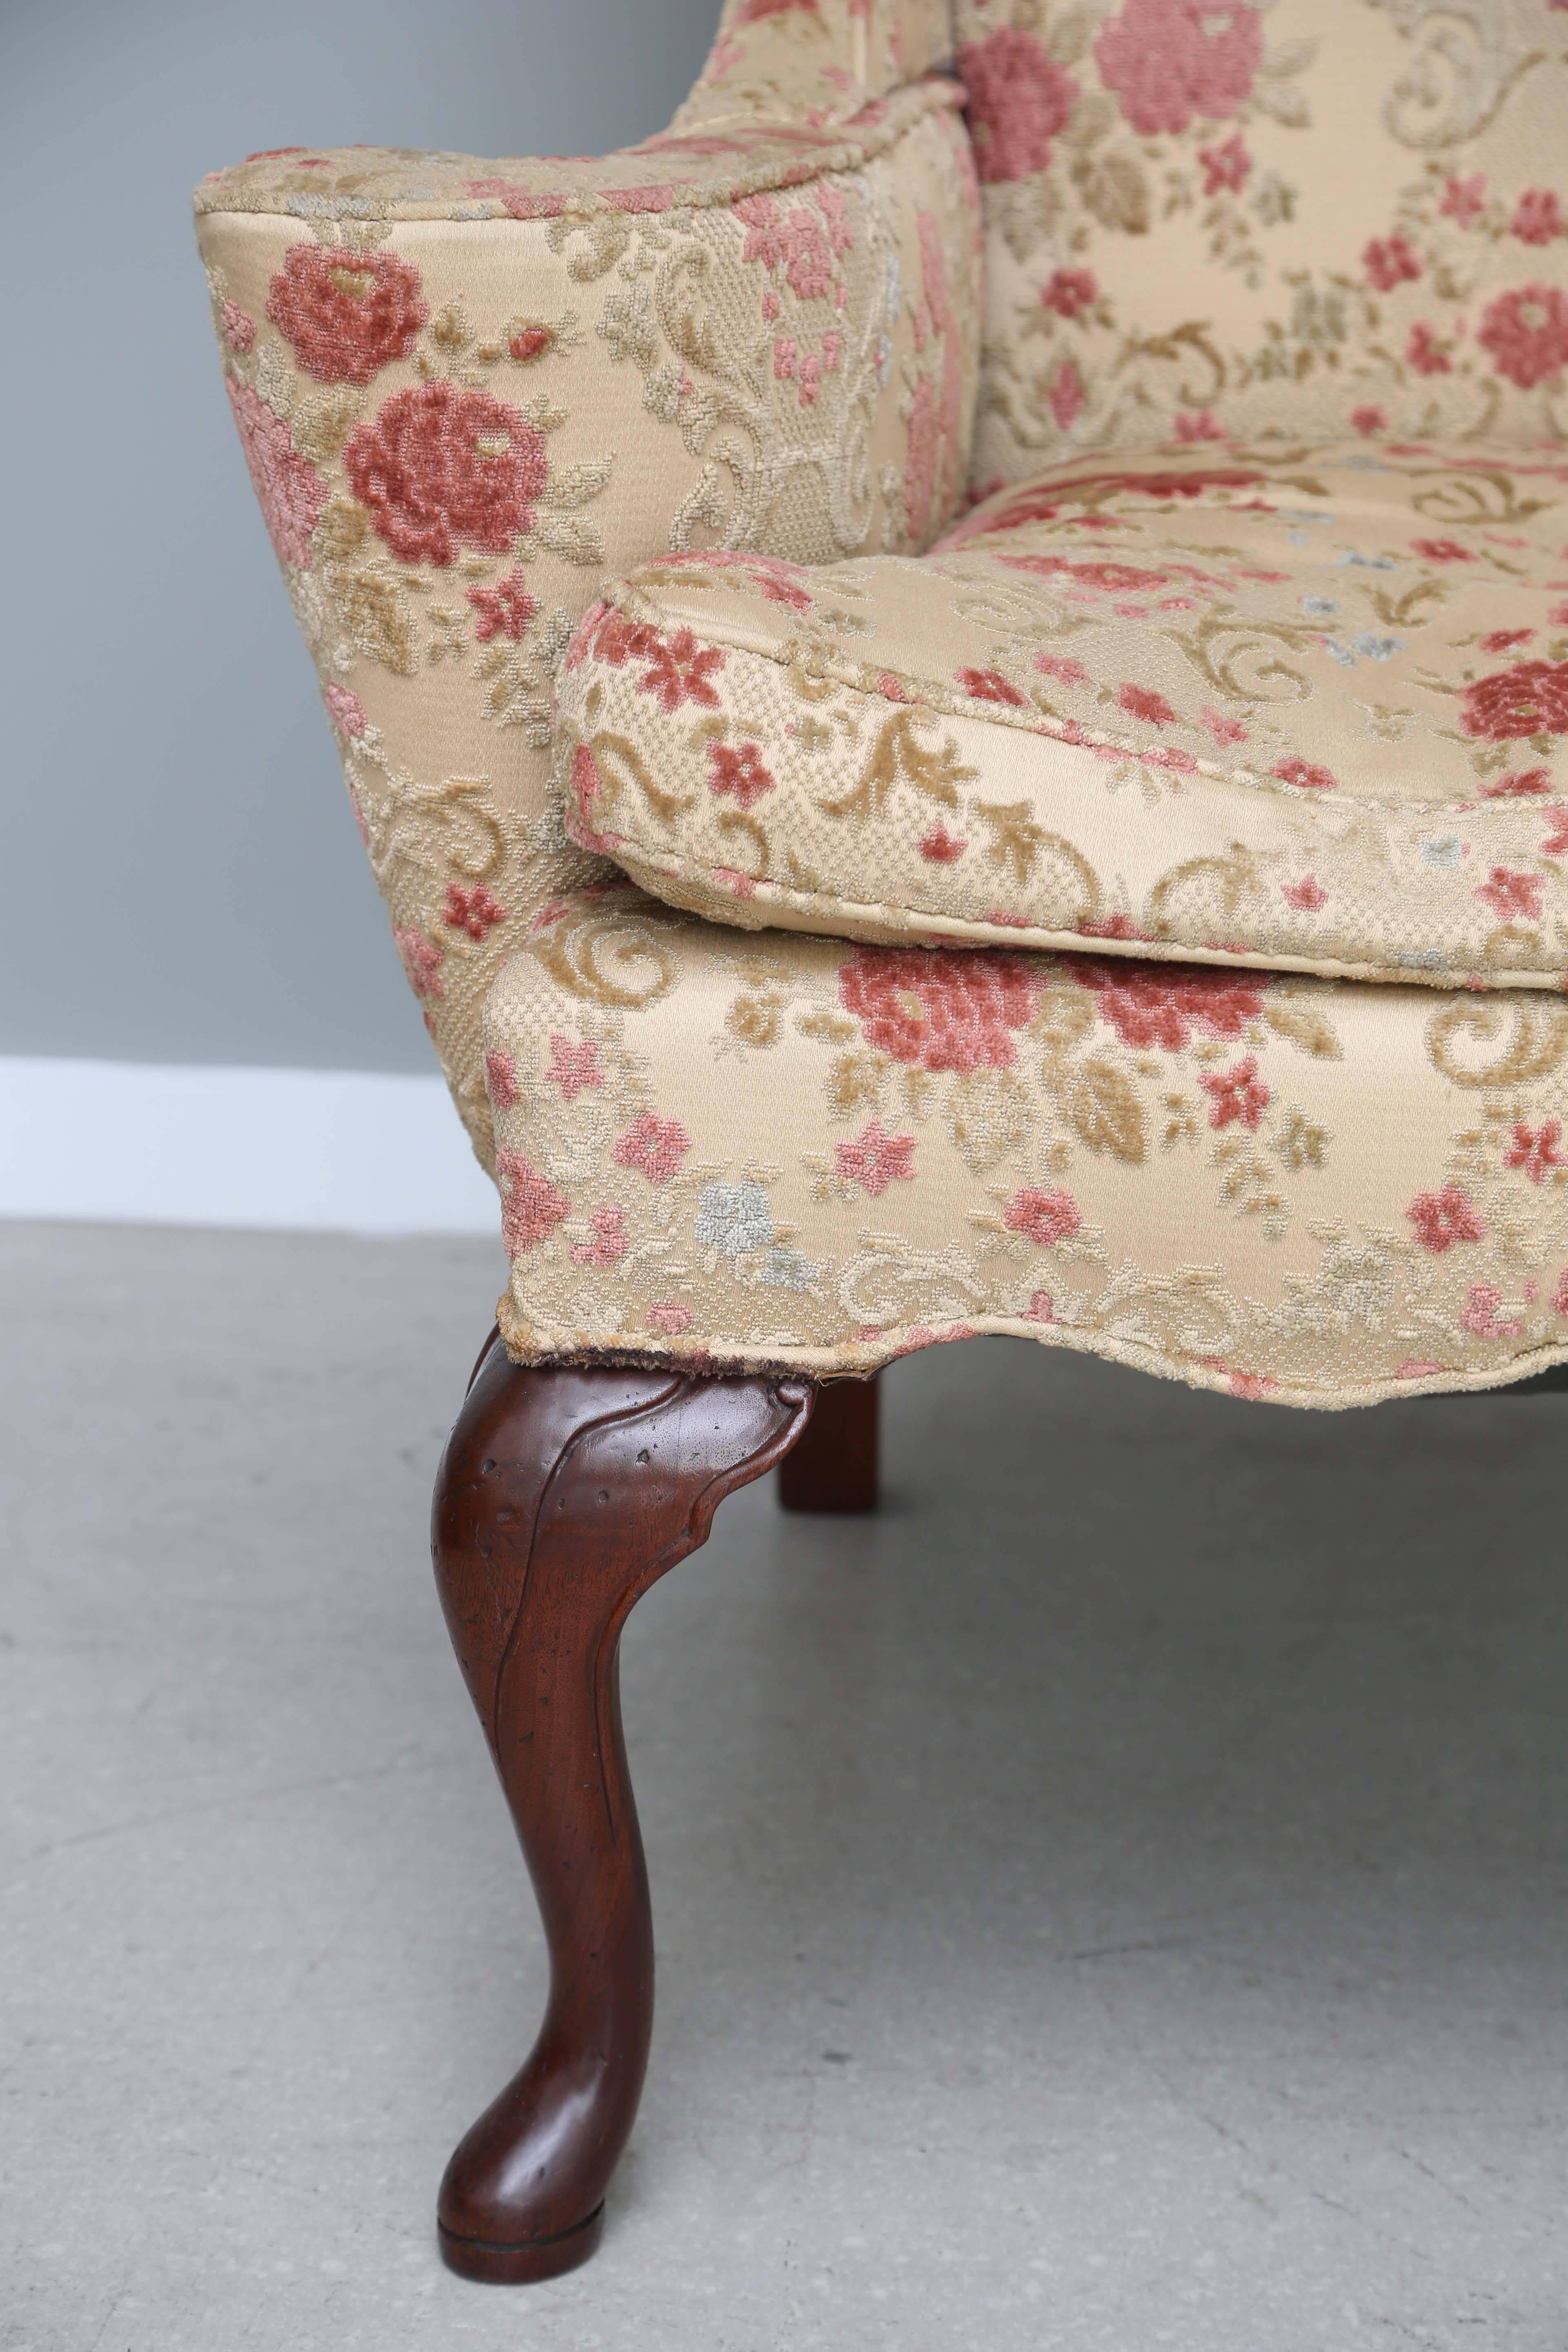 20th Century Dynamic Queen Anne Style Chair with Floral Upholstery For Sale